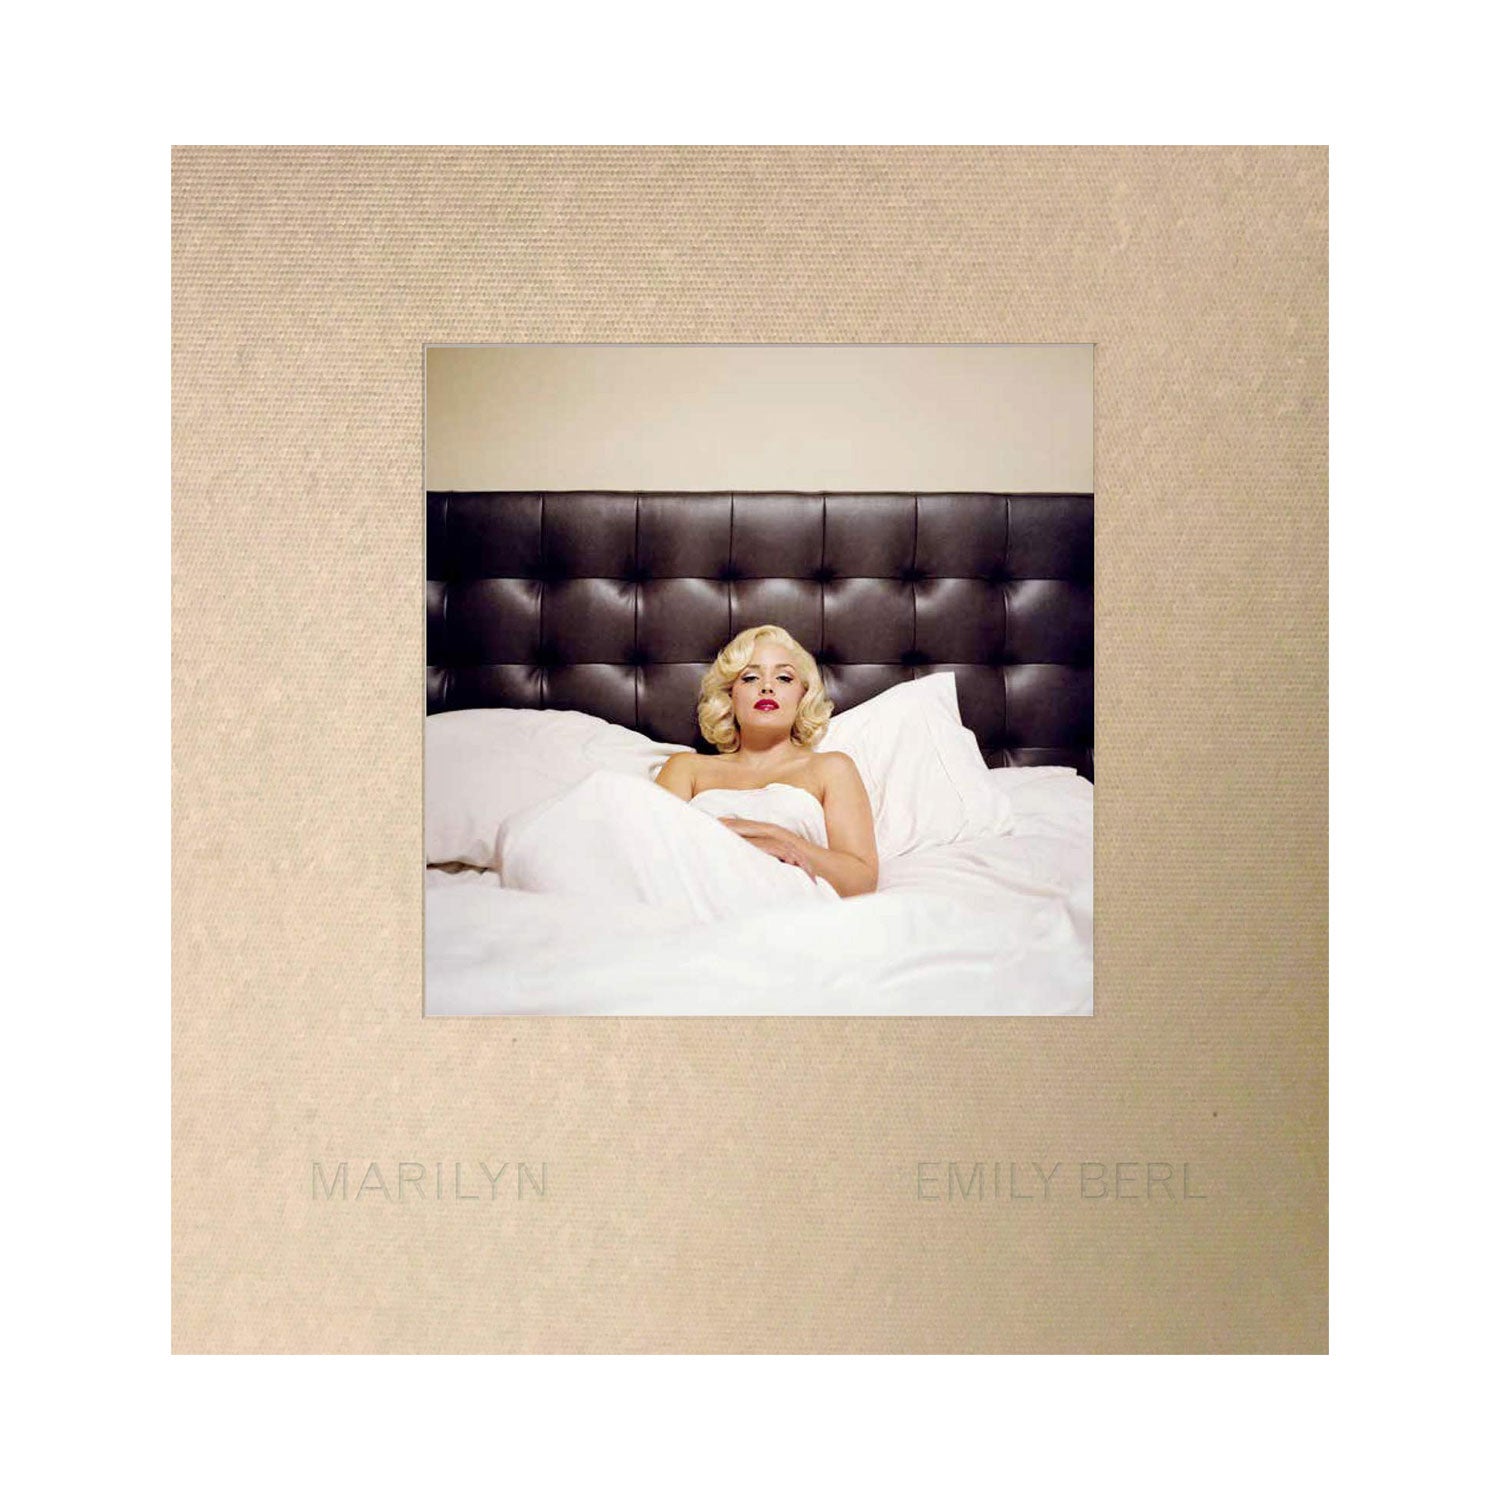 Marilyn by Emily Berl Photo Museum Ireland